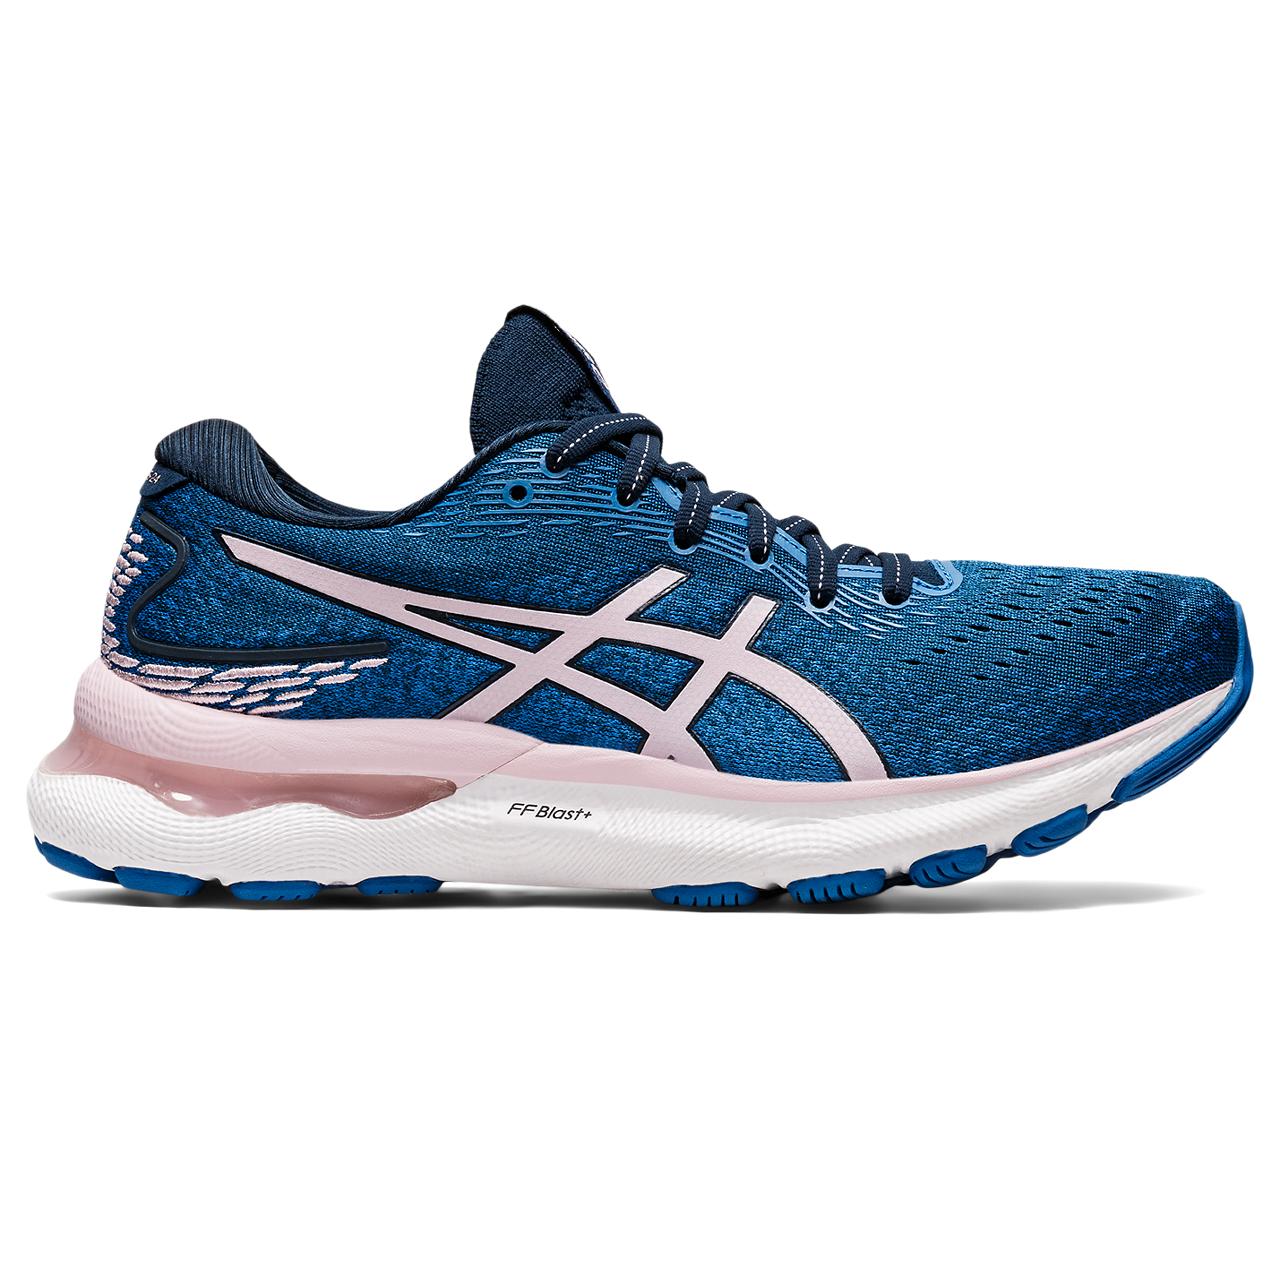 The Women's Nimbus 24 is one of the classics from ASICS.  It's been one of the best-selling cushioned neutral shoes for many years and will no doubt continue that trend with version 24. This version comes in the Wide Fit - "D" in the color way French Blue/Barely Rose